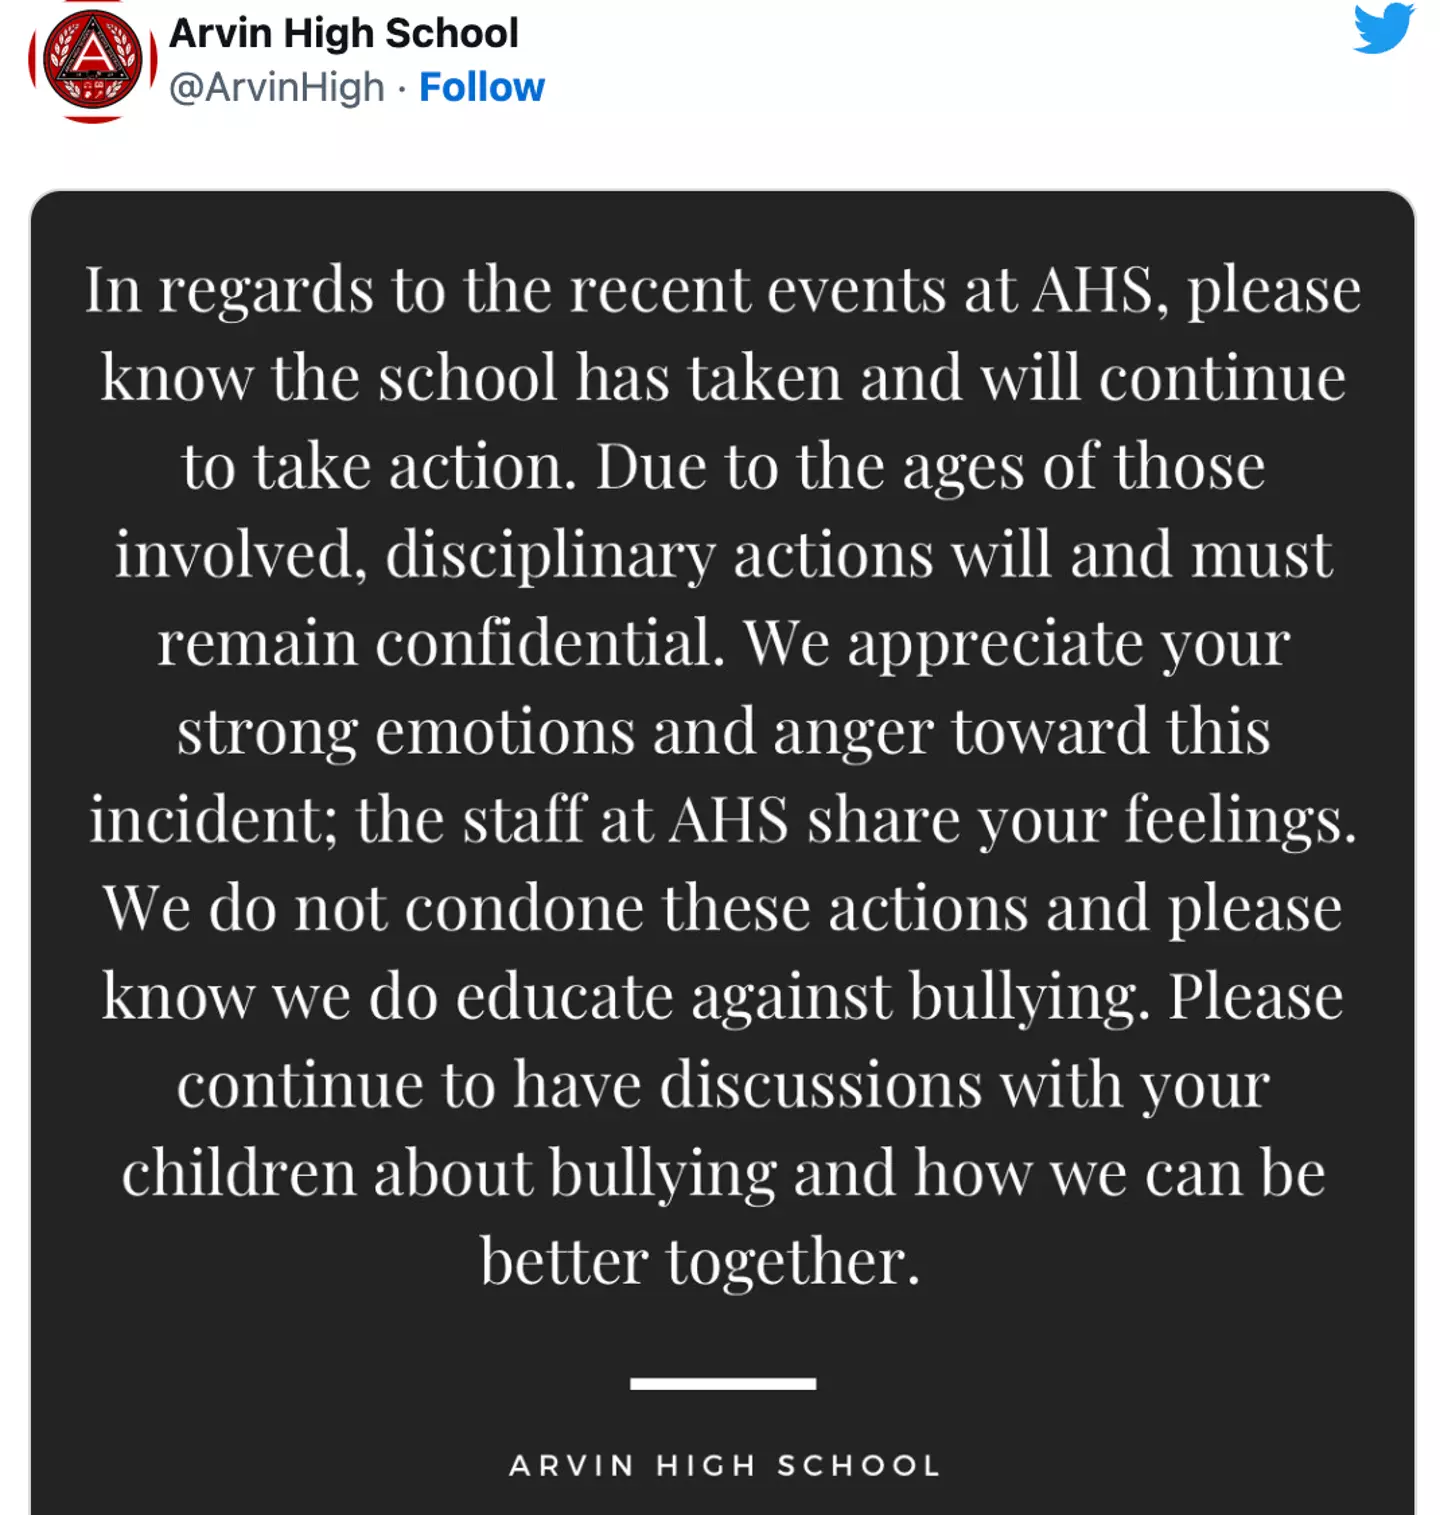 Arvin High School responded to the incident on Twitter.